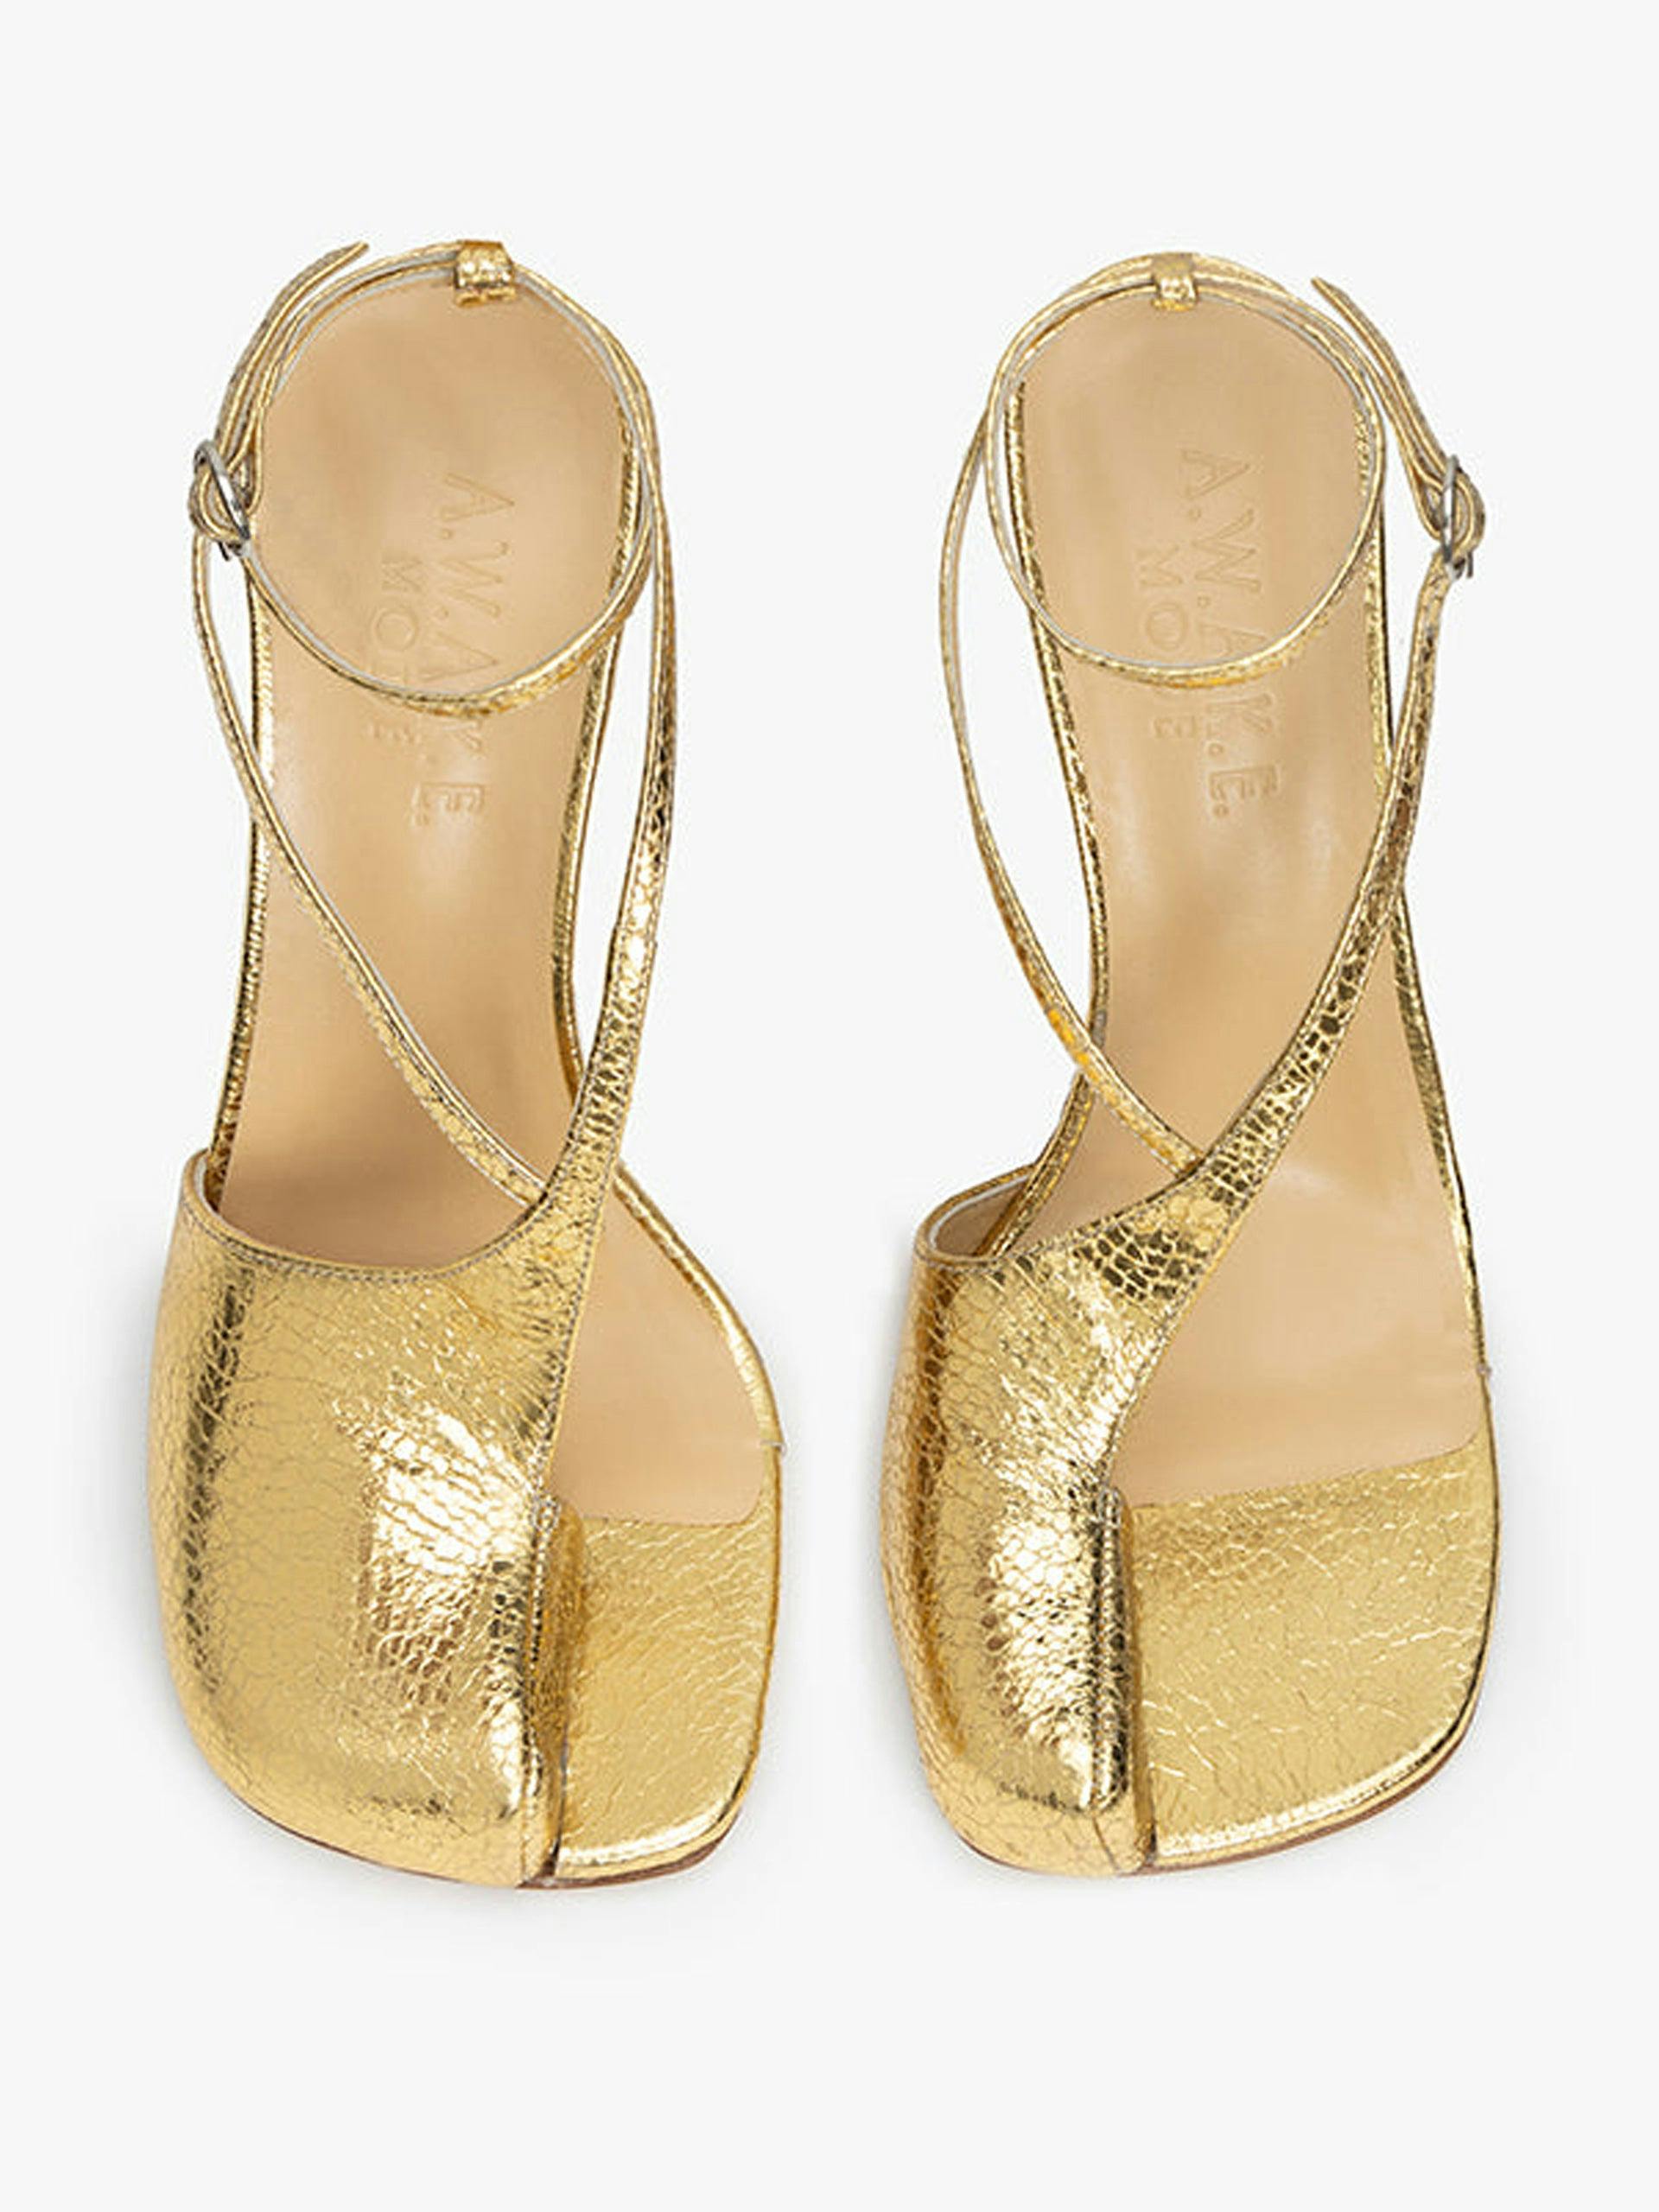 Christine shoes in gold